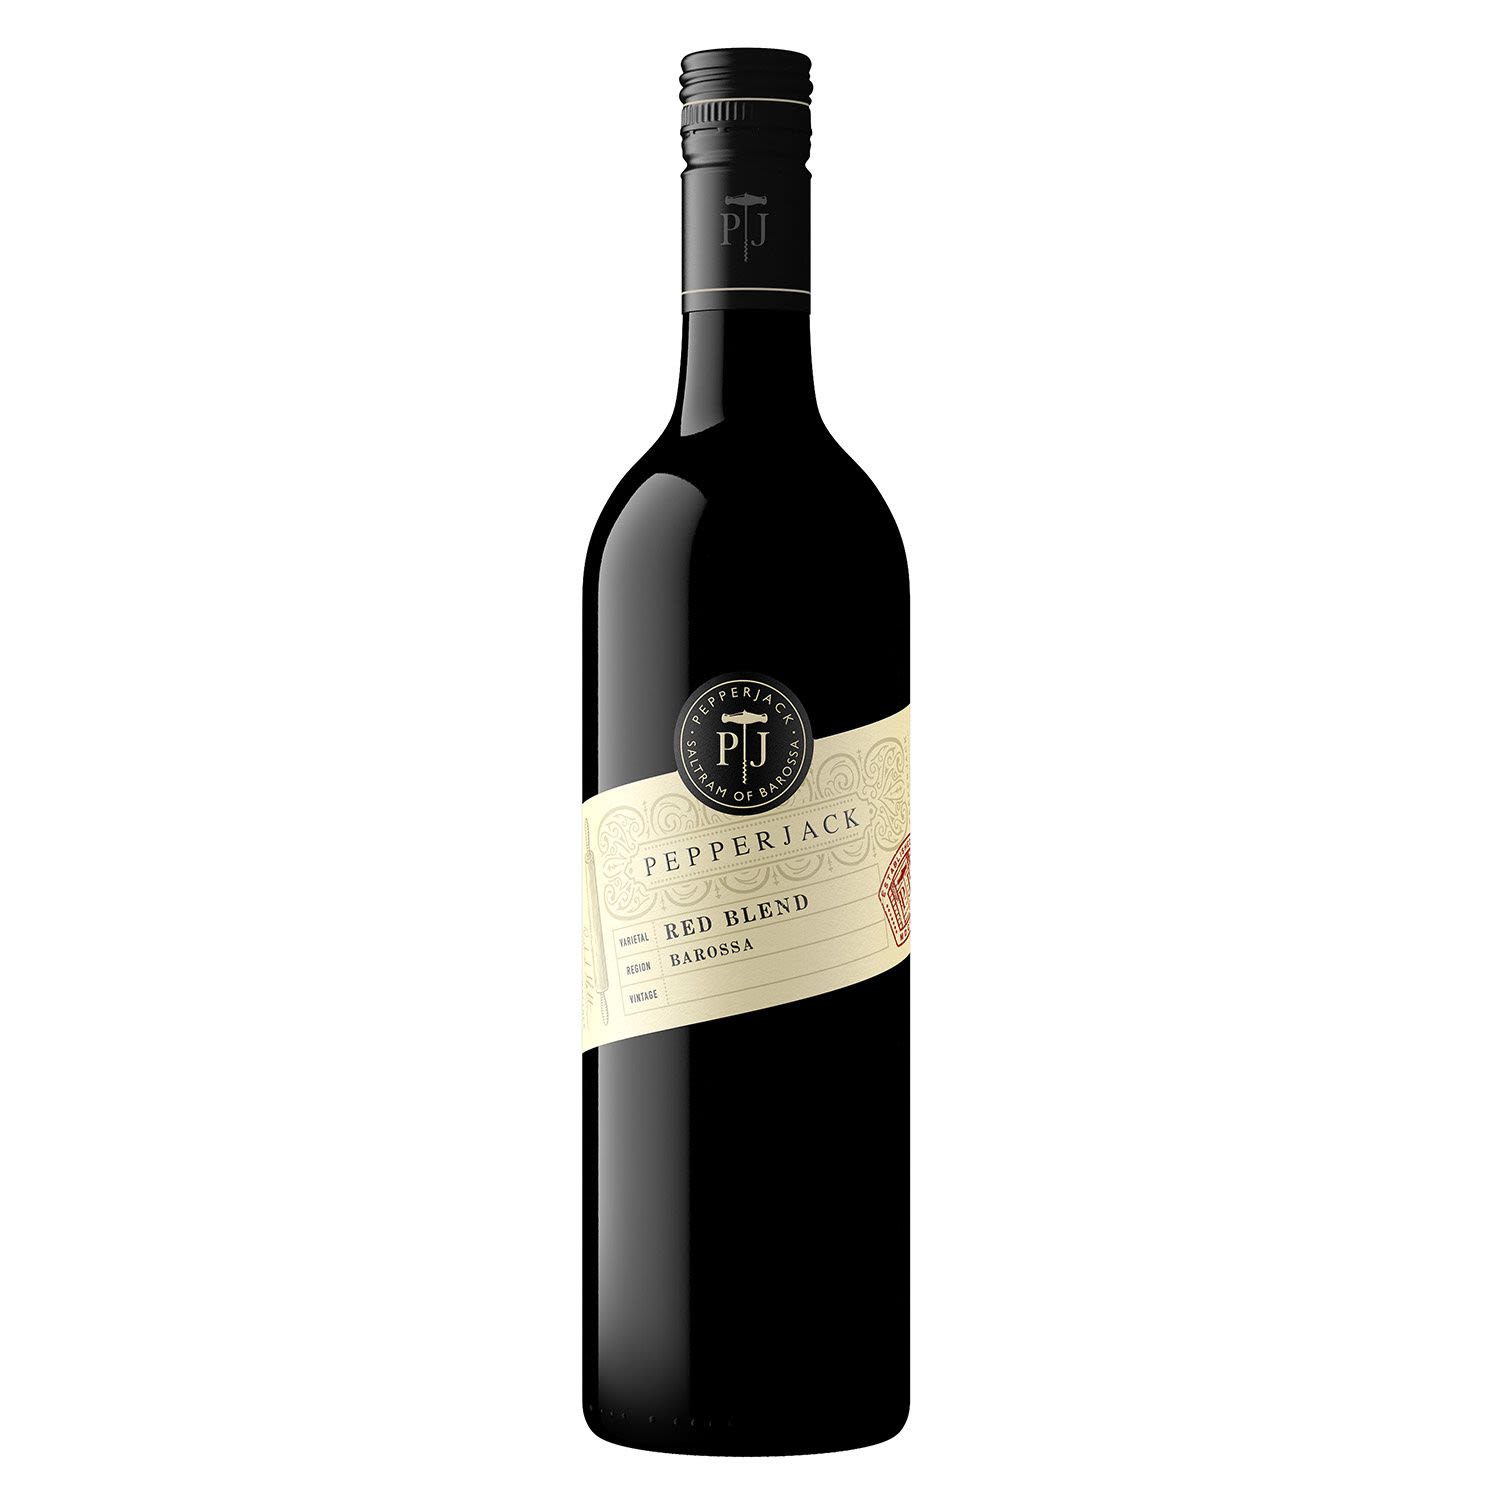 Pepperjack Barossa Red 750mL is an enticing, medium-to-full bodied red from the heart of the Barossa Valley. made from Shiraz, Grenache & Merlot, this dark, brooding red has hints of spice & vanilla, dark chocolate & herbal notes with a good, long finish.<br /> <br />Alcohol Volume: 14.50%<br /><br />Pack Format: 6 Pack<br /><br />Standard Drinks: 8.6</br /><br />Pack Type: Bottle<br /><br />Country of Origin: Australia<br /><br />Region: Barossa Valley<br /><br />Vintage: Vintages Vary<br />